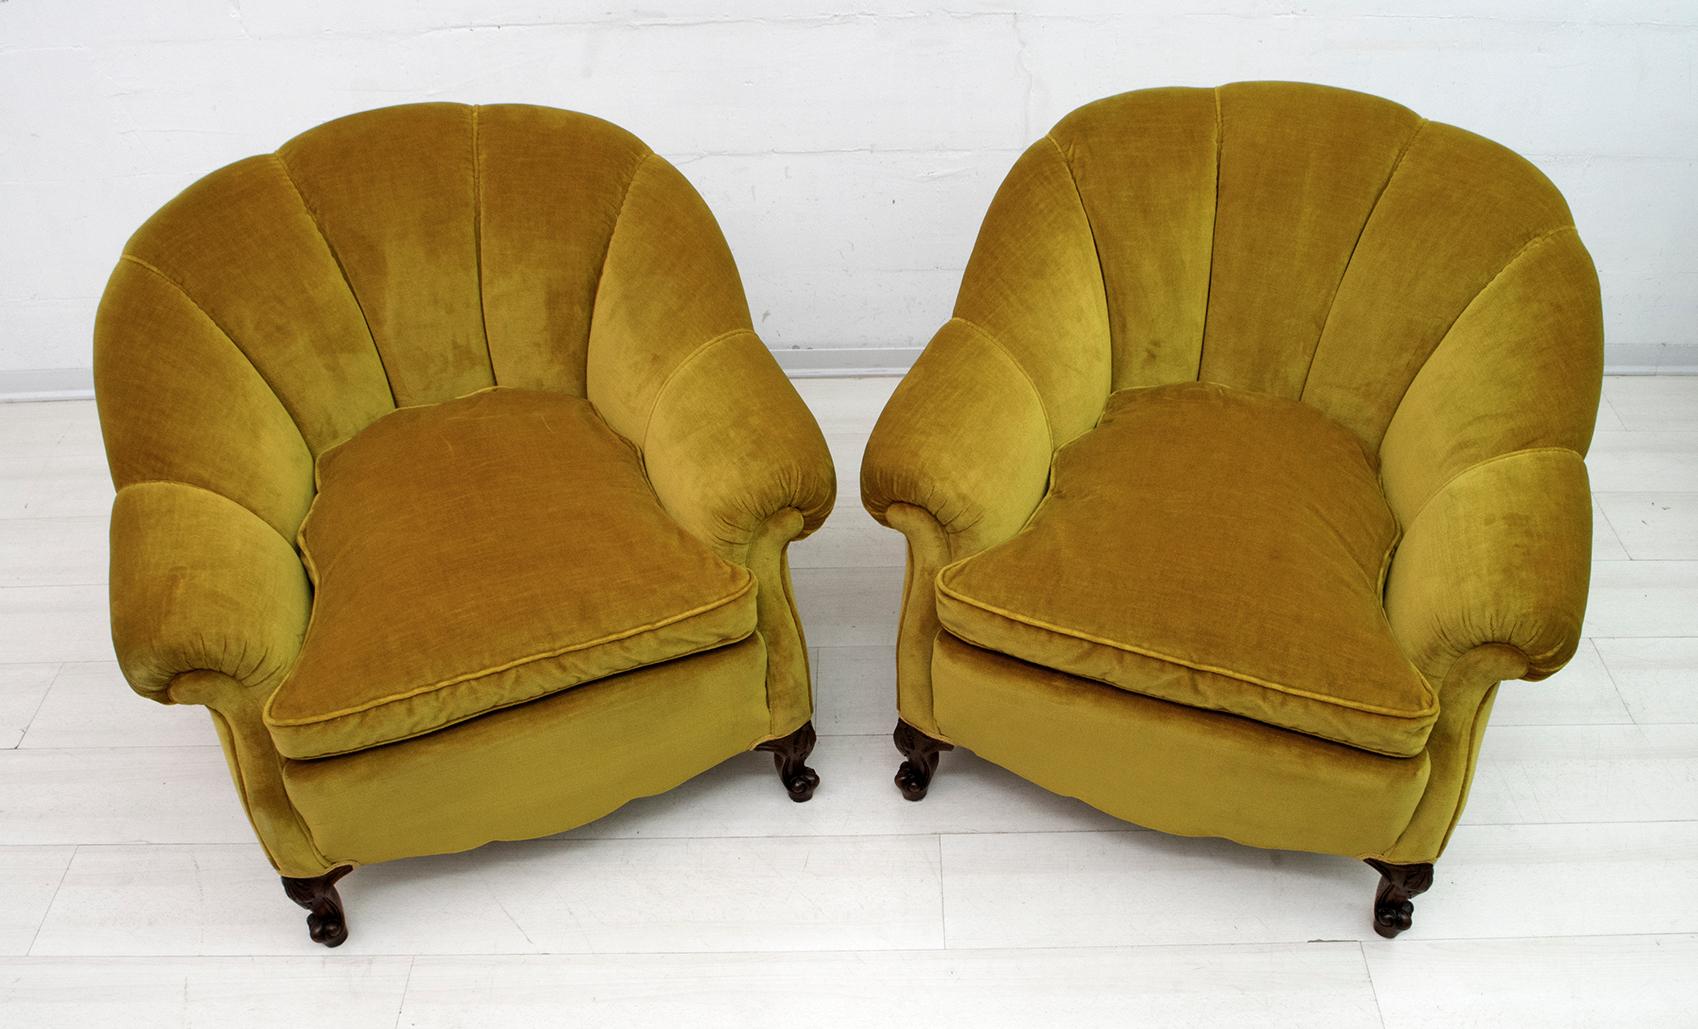 Pair of 1950s armchairs, velvet upholstery, kept in good condition.
The price is for the couple.